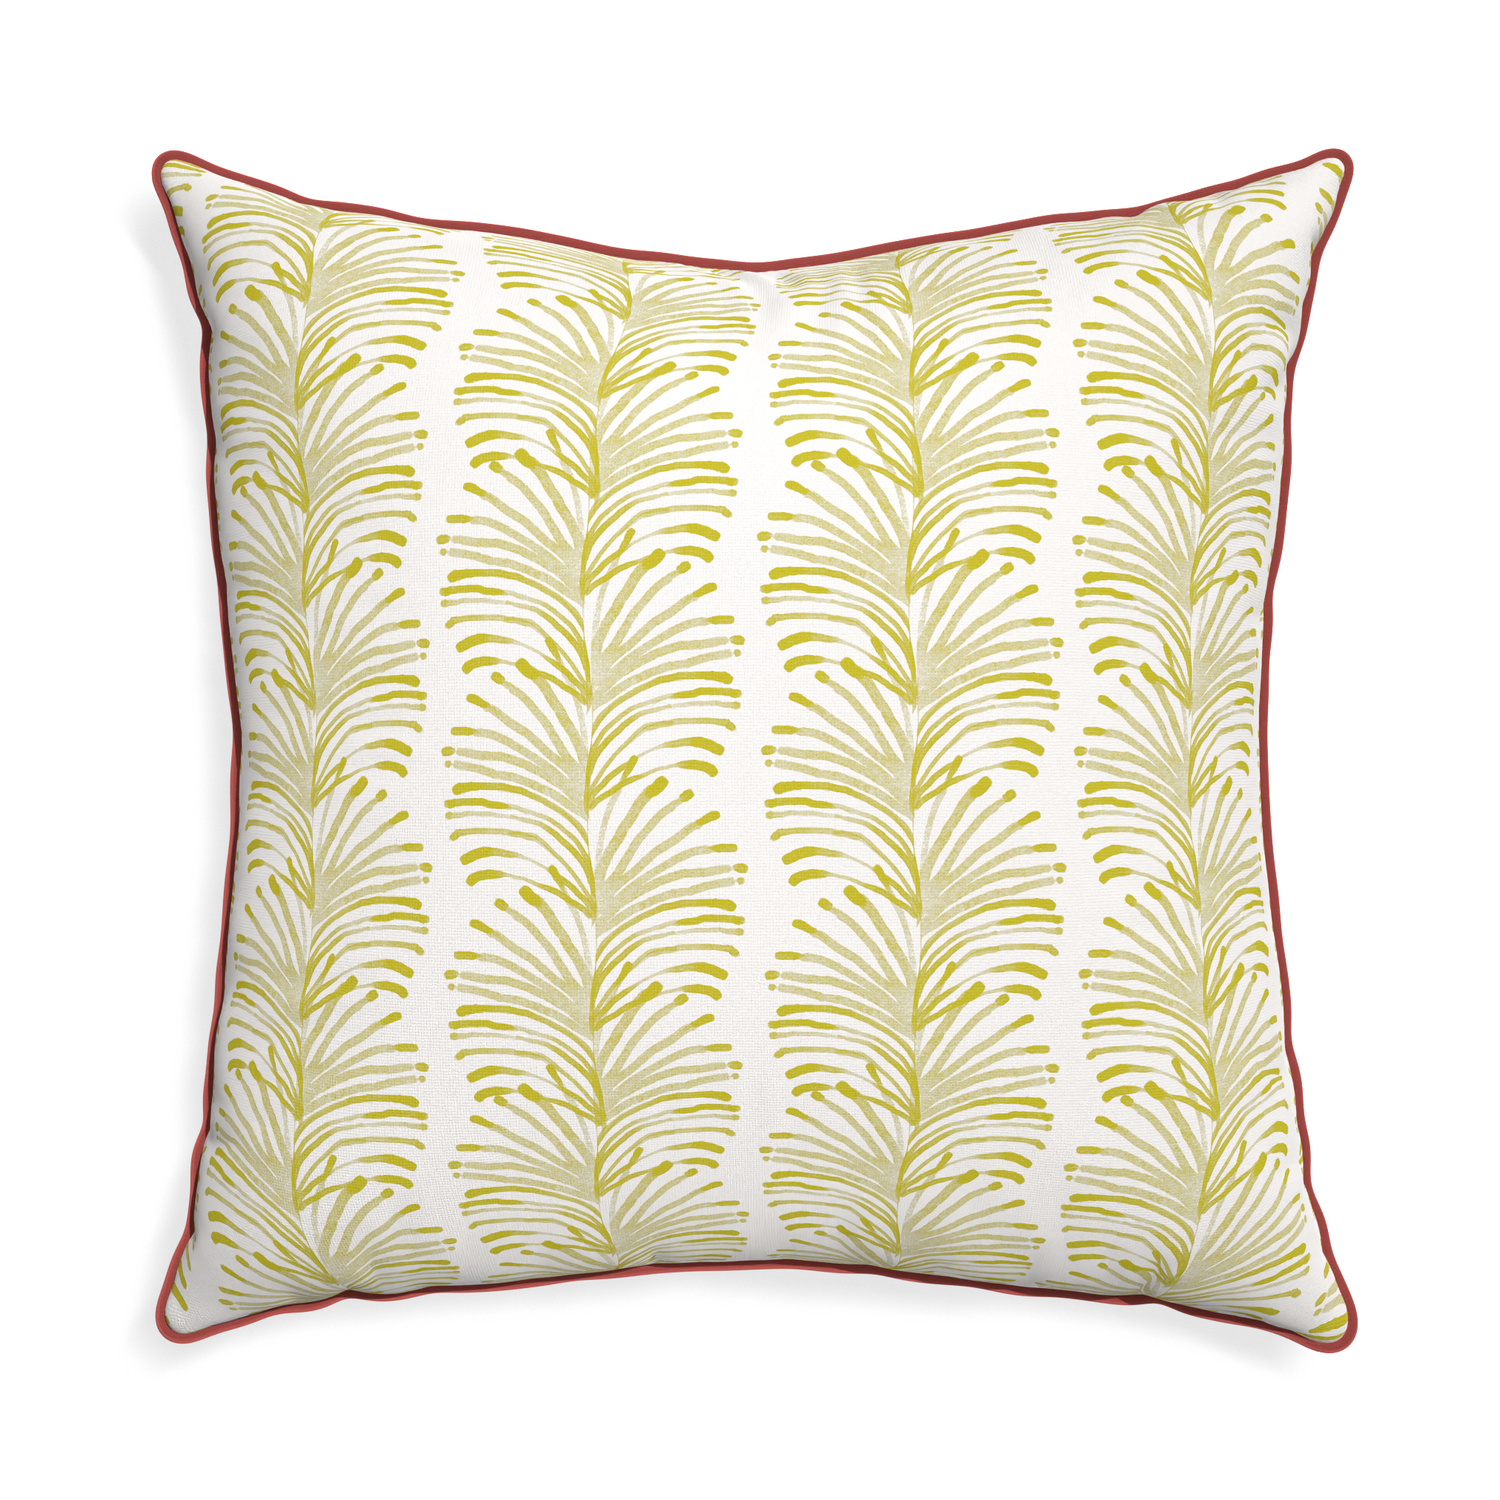 Euro-sham emma chartreuse custom pillow with c piping on white background